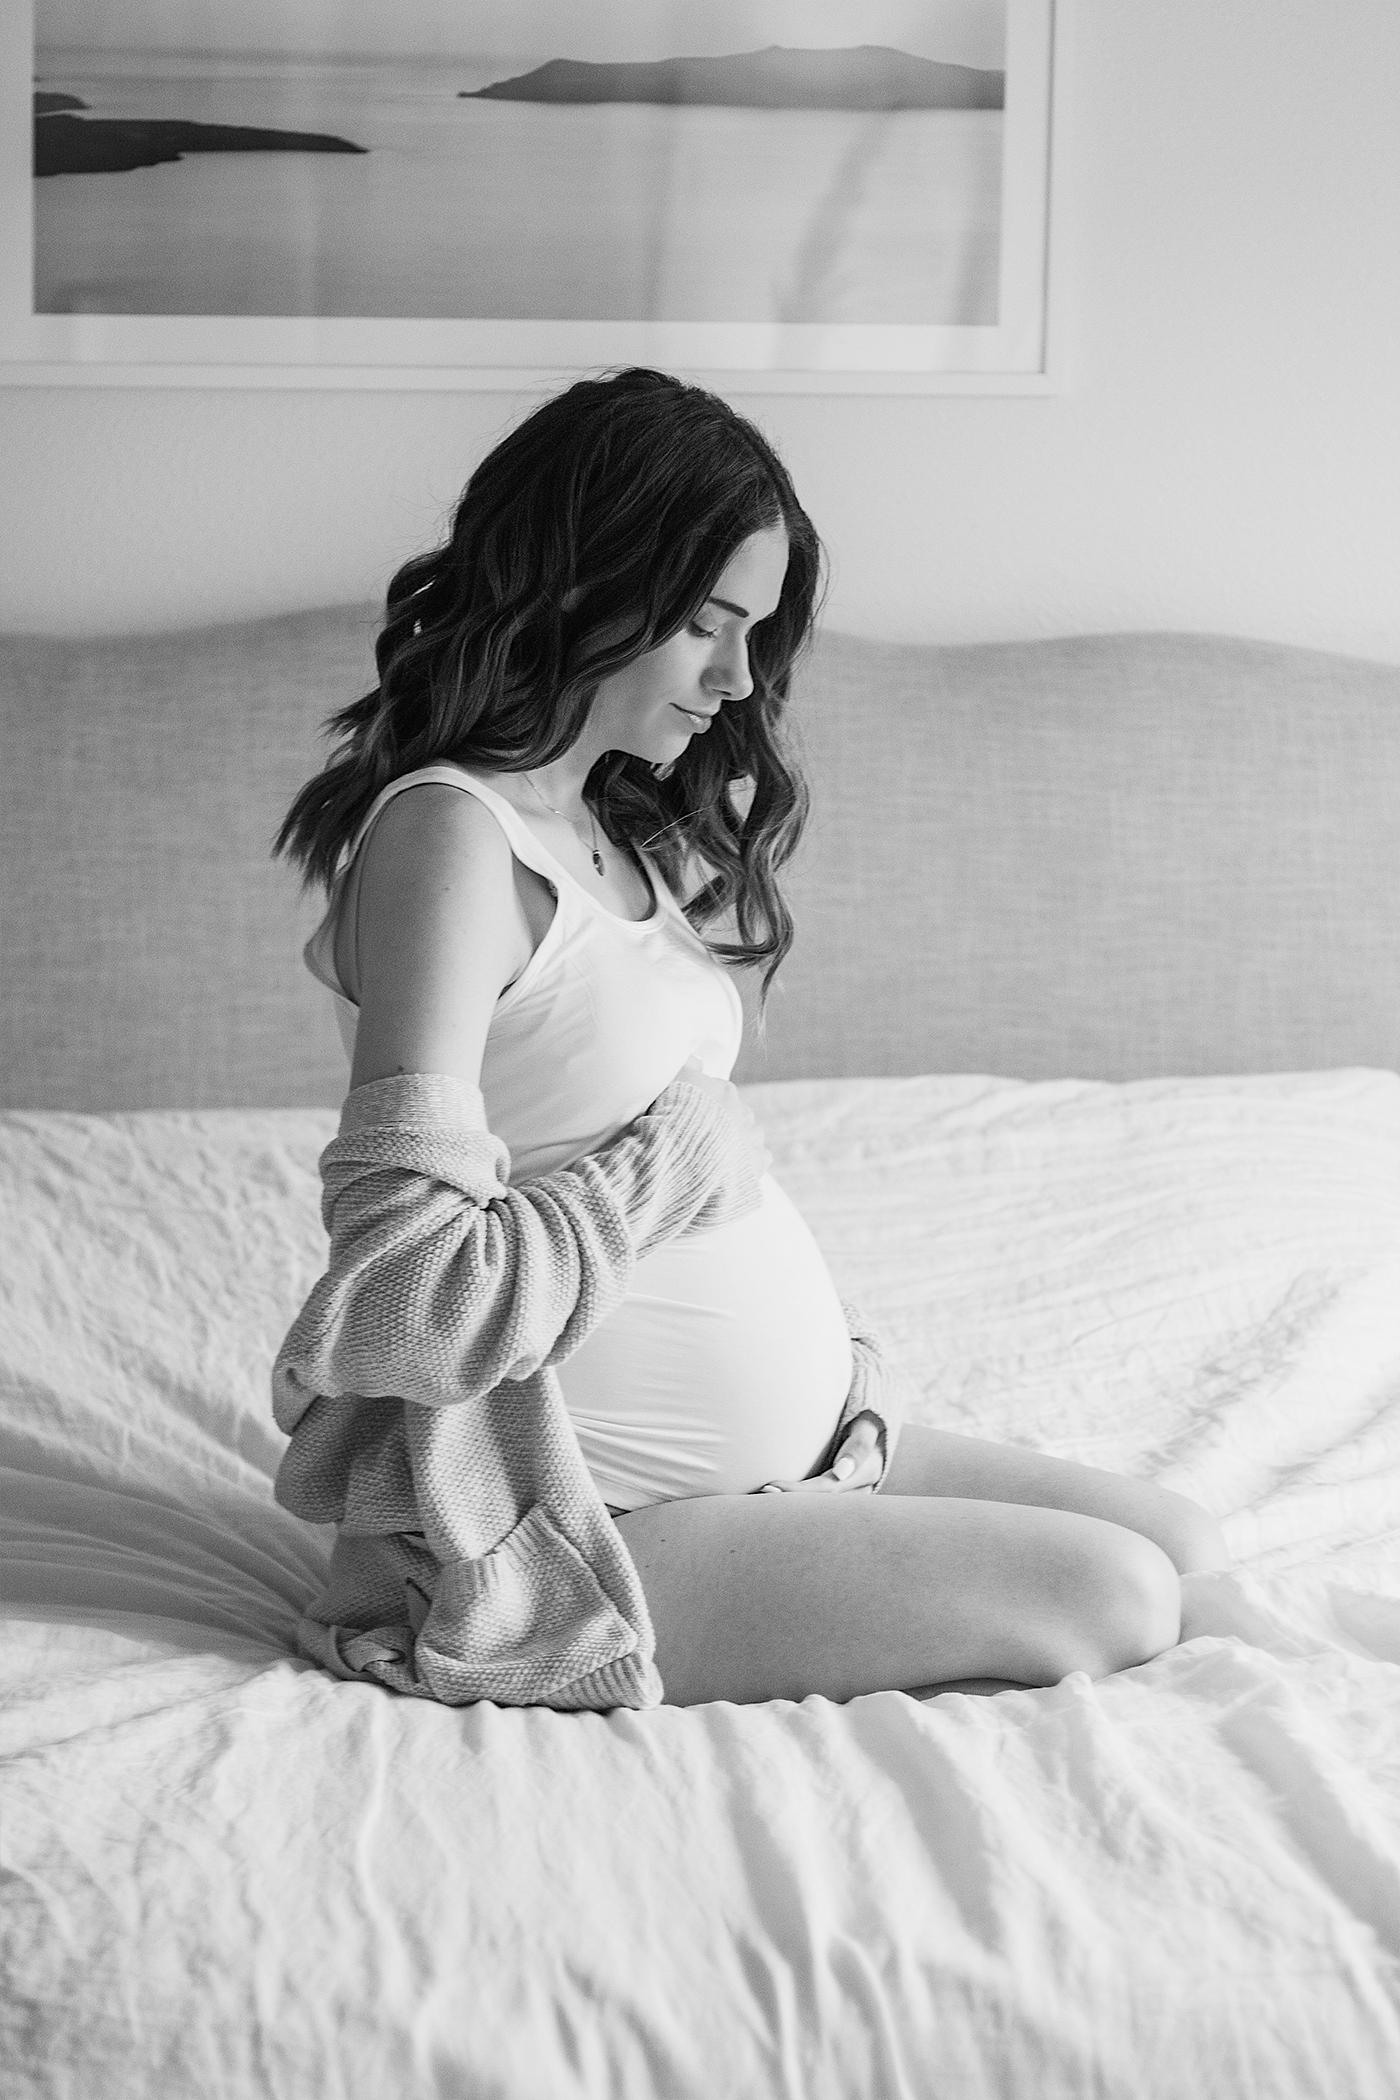 10 At Home Maternity Shoot Ideas That Willl Turn Out Flawless